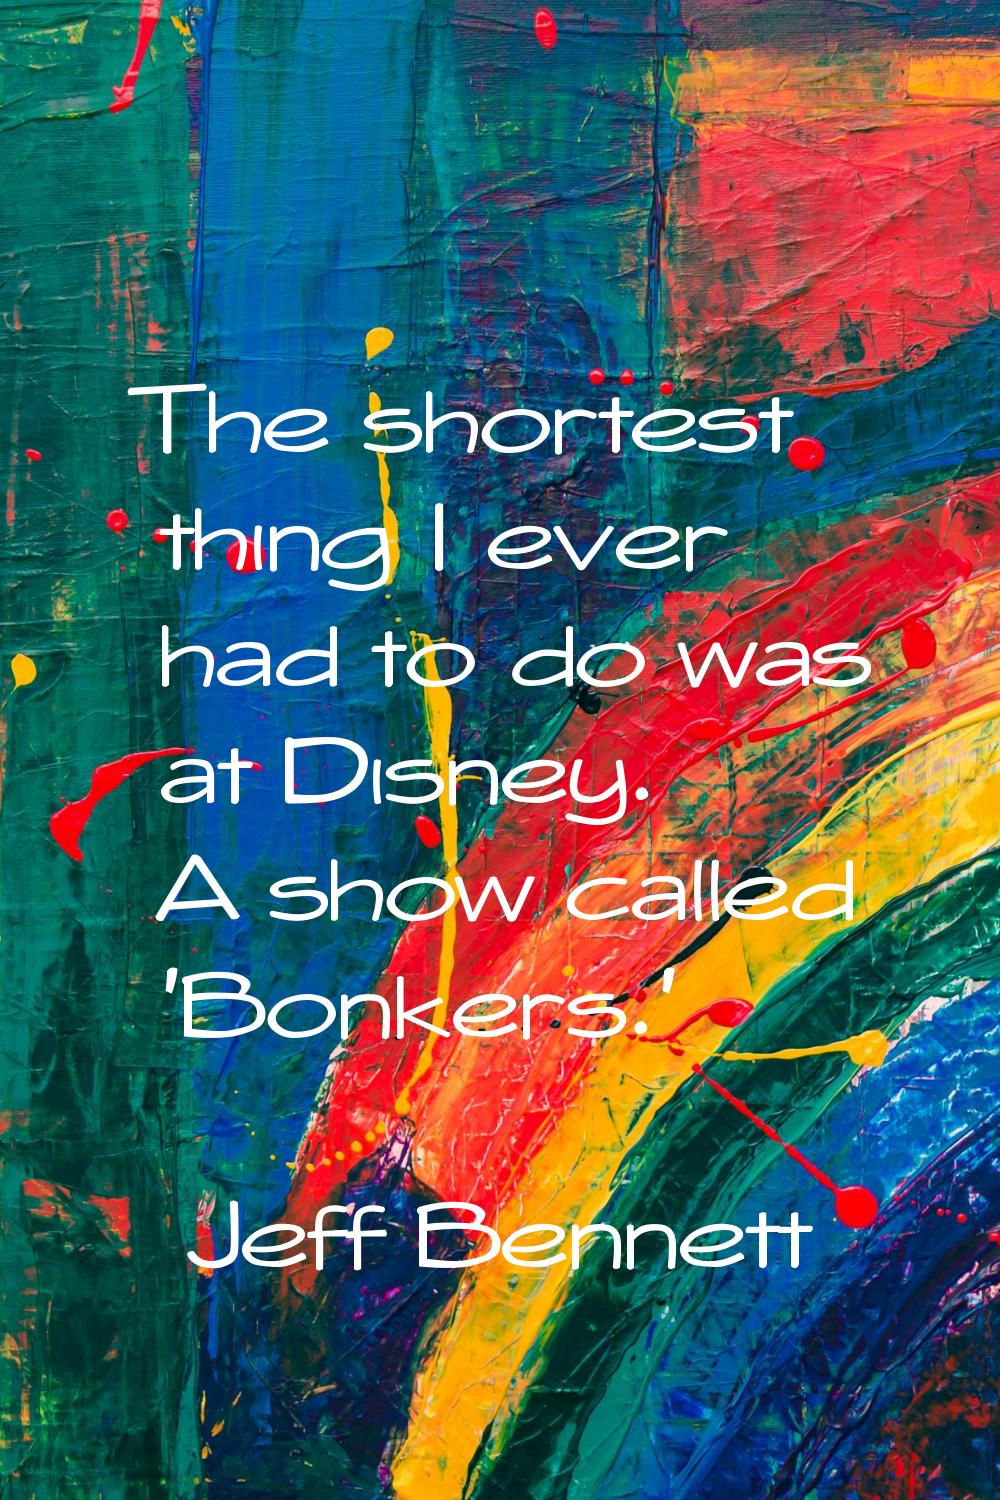 The shortest thing I ever had to do was at Disney. A show called 'Bonkers.'